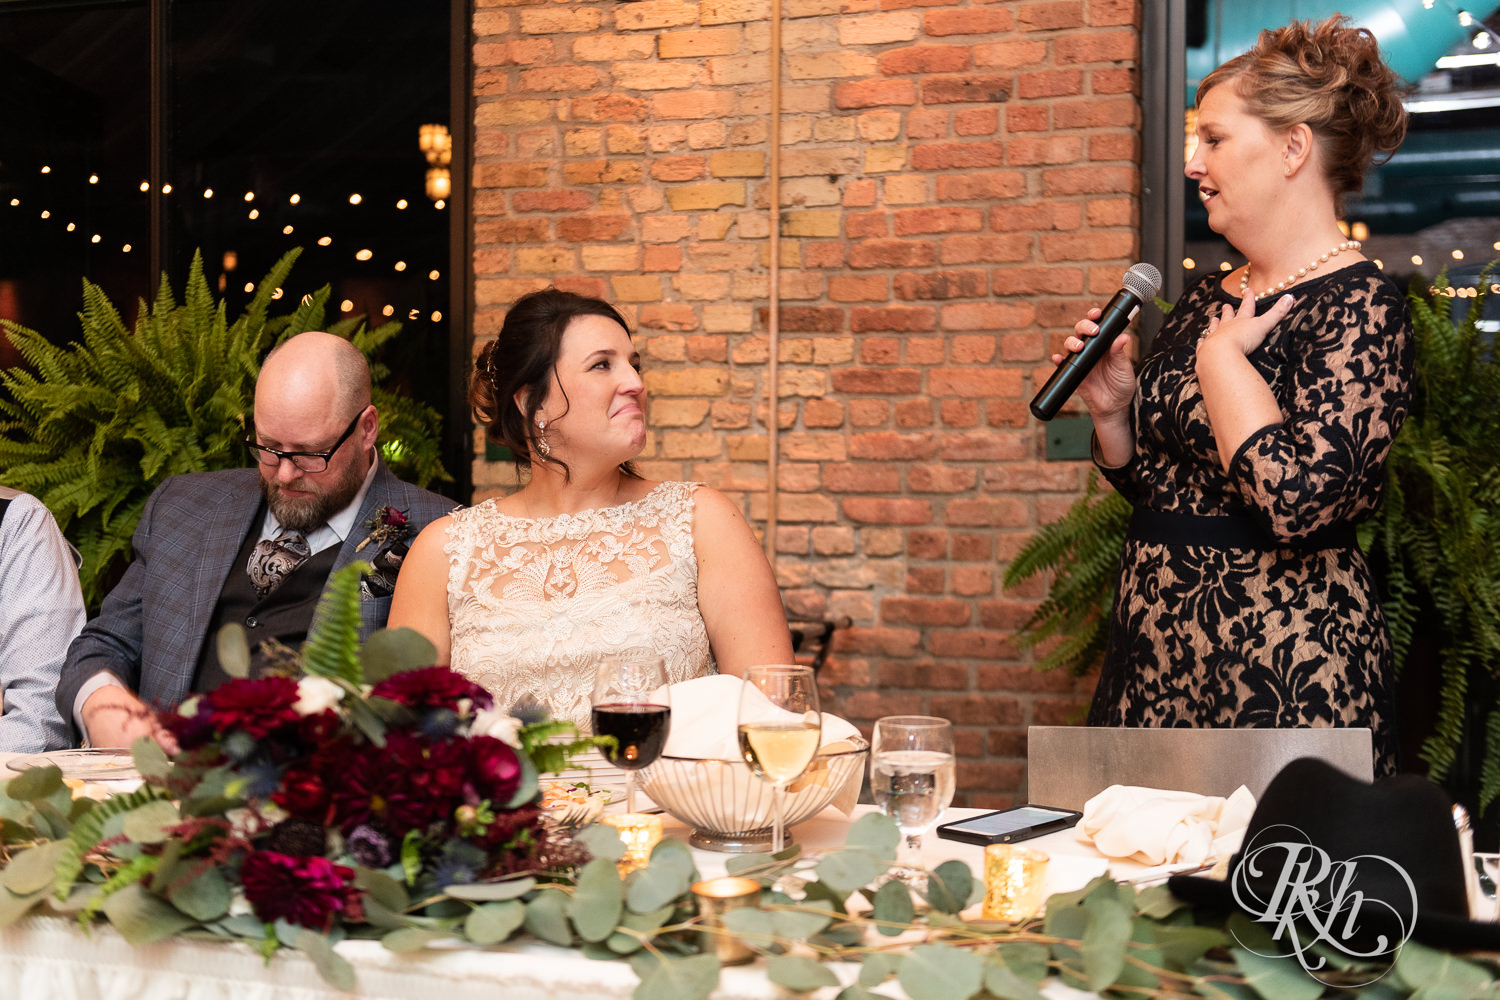 Bride and groom tear up during wedding reception at Nicollet Island Pavilion in Minneapolis, Minnesota.